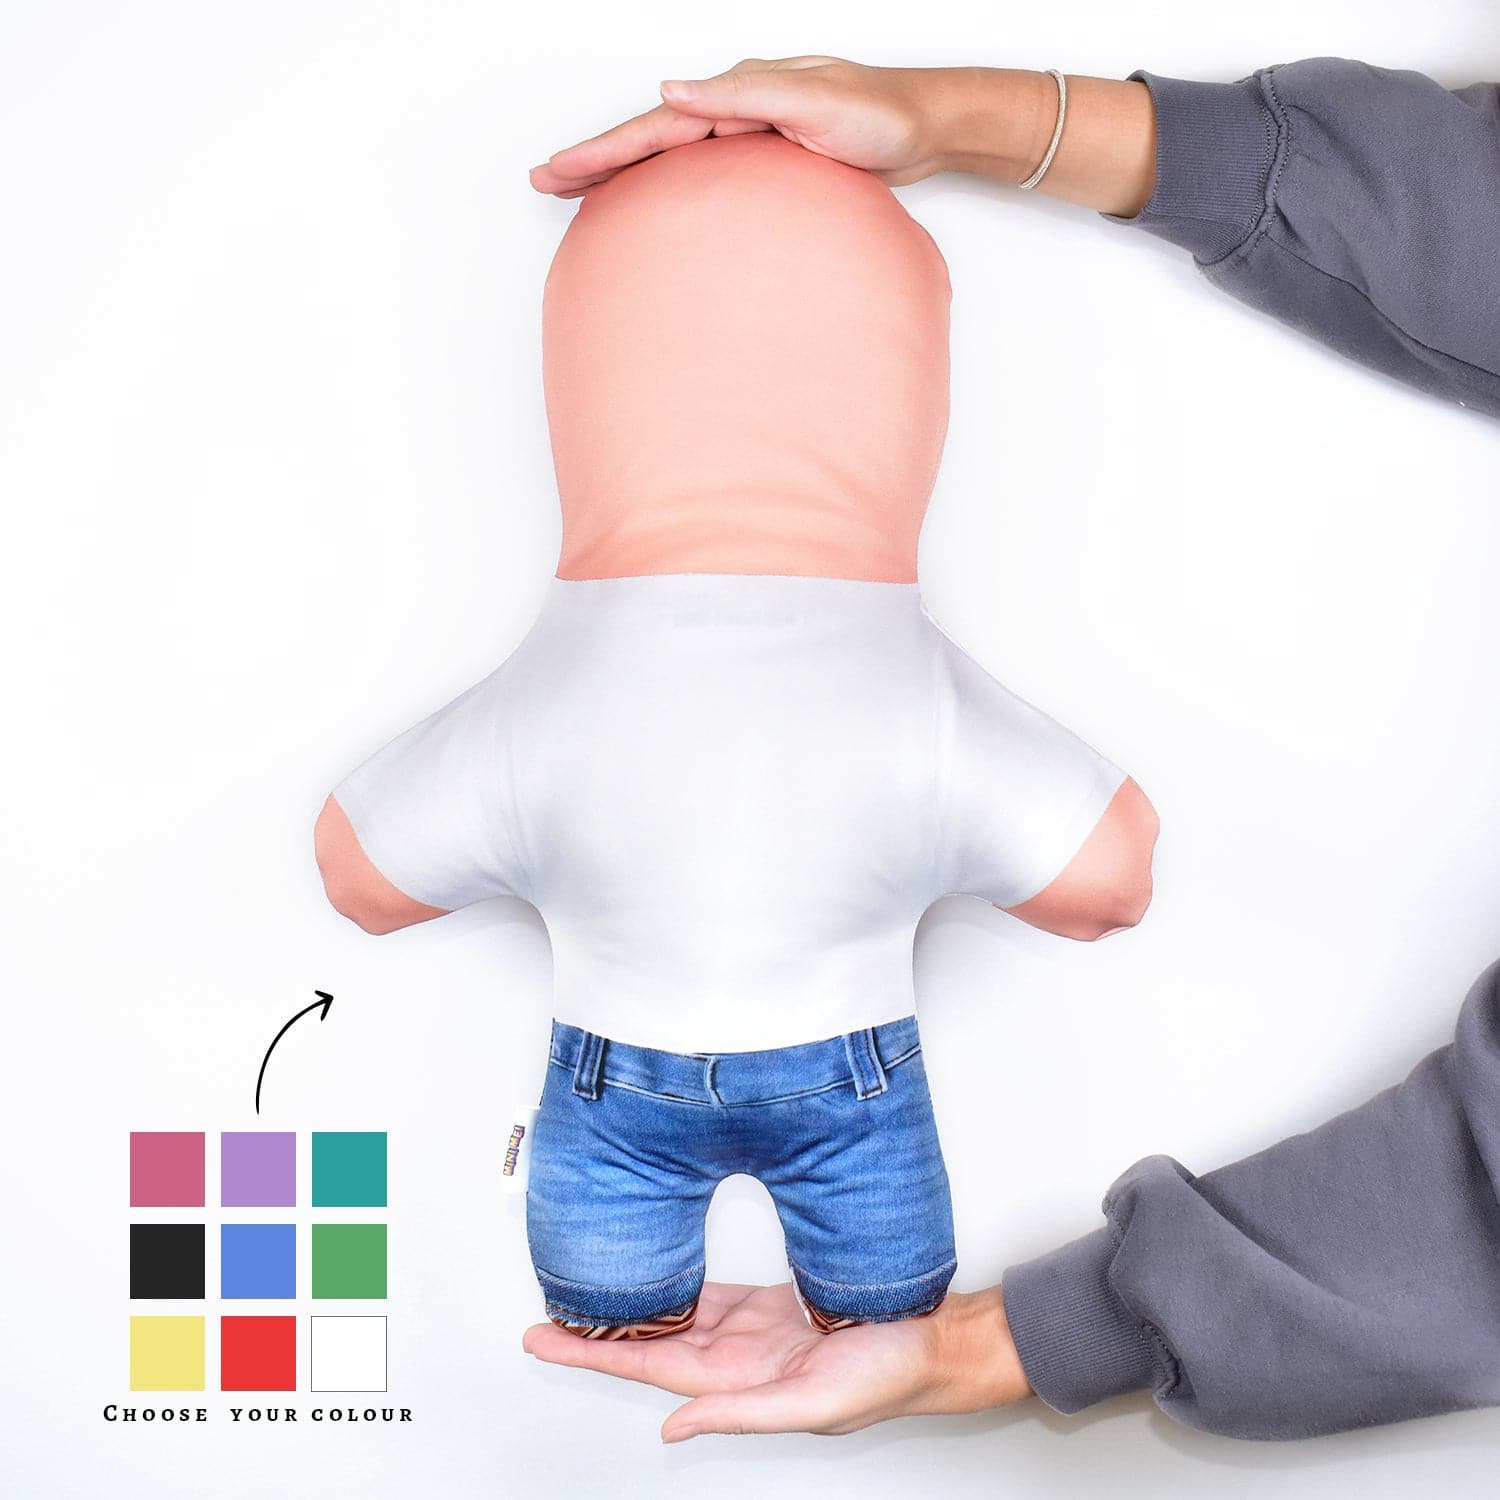 I Love Top - Choose Your Colour - Personalised Mini Me Doll